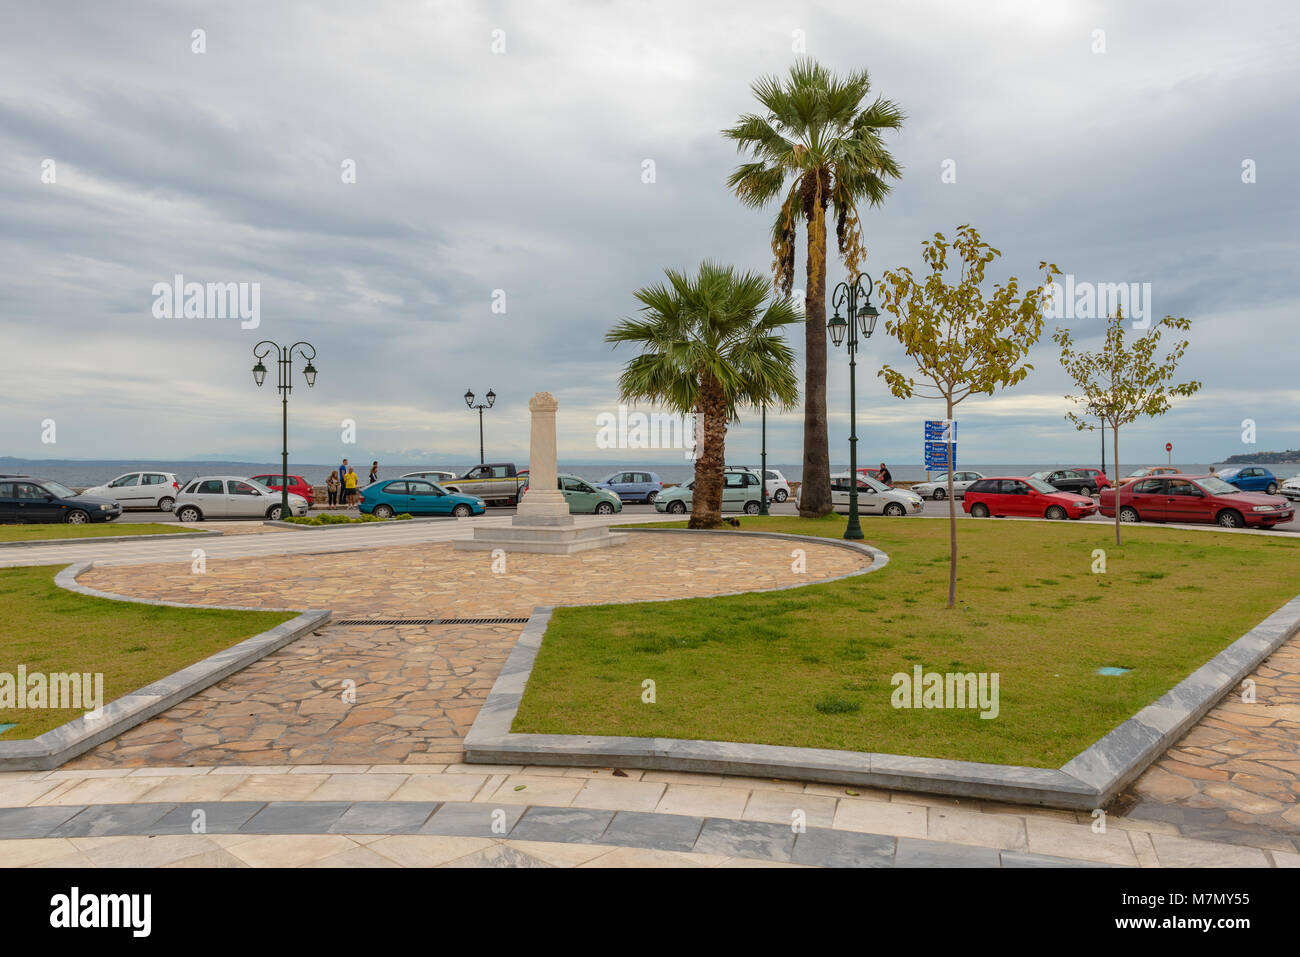 ZAKYNTHOS, GREECE - September 29, 2017: View of palm trees and sea from main square in Zakynthos town, Greece. Stock Photo